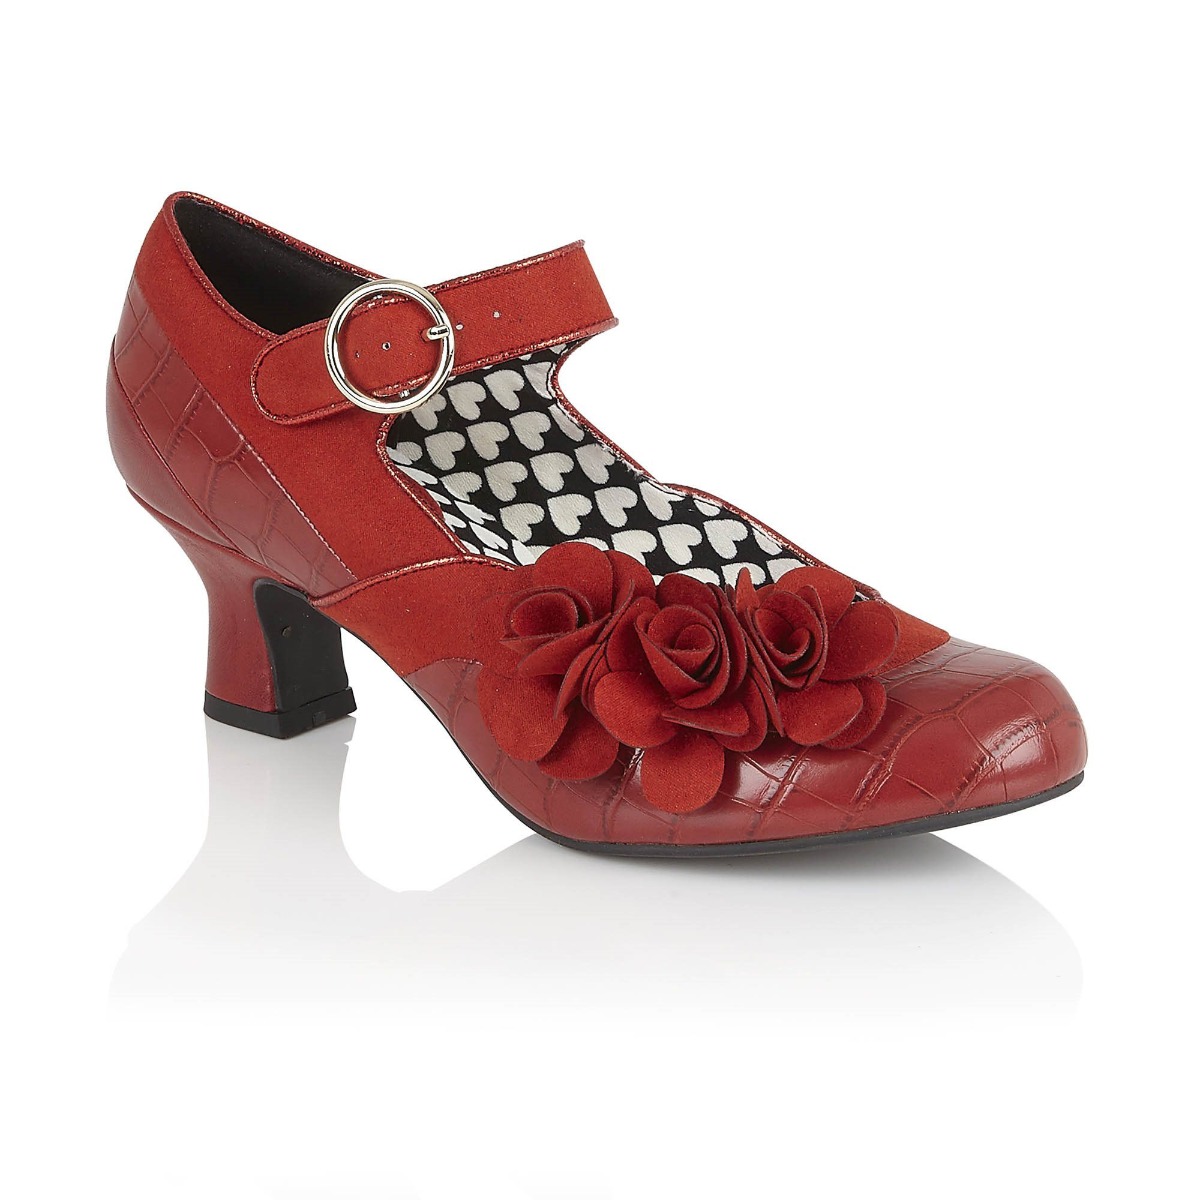 rs09346b_chaussures-escarpins-pin-up-retro-50-s-glam-chic-mabel-rouge